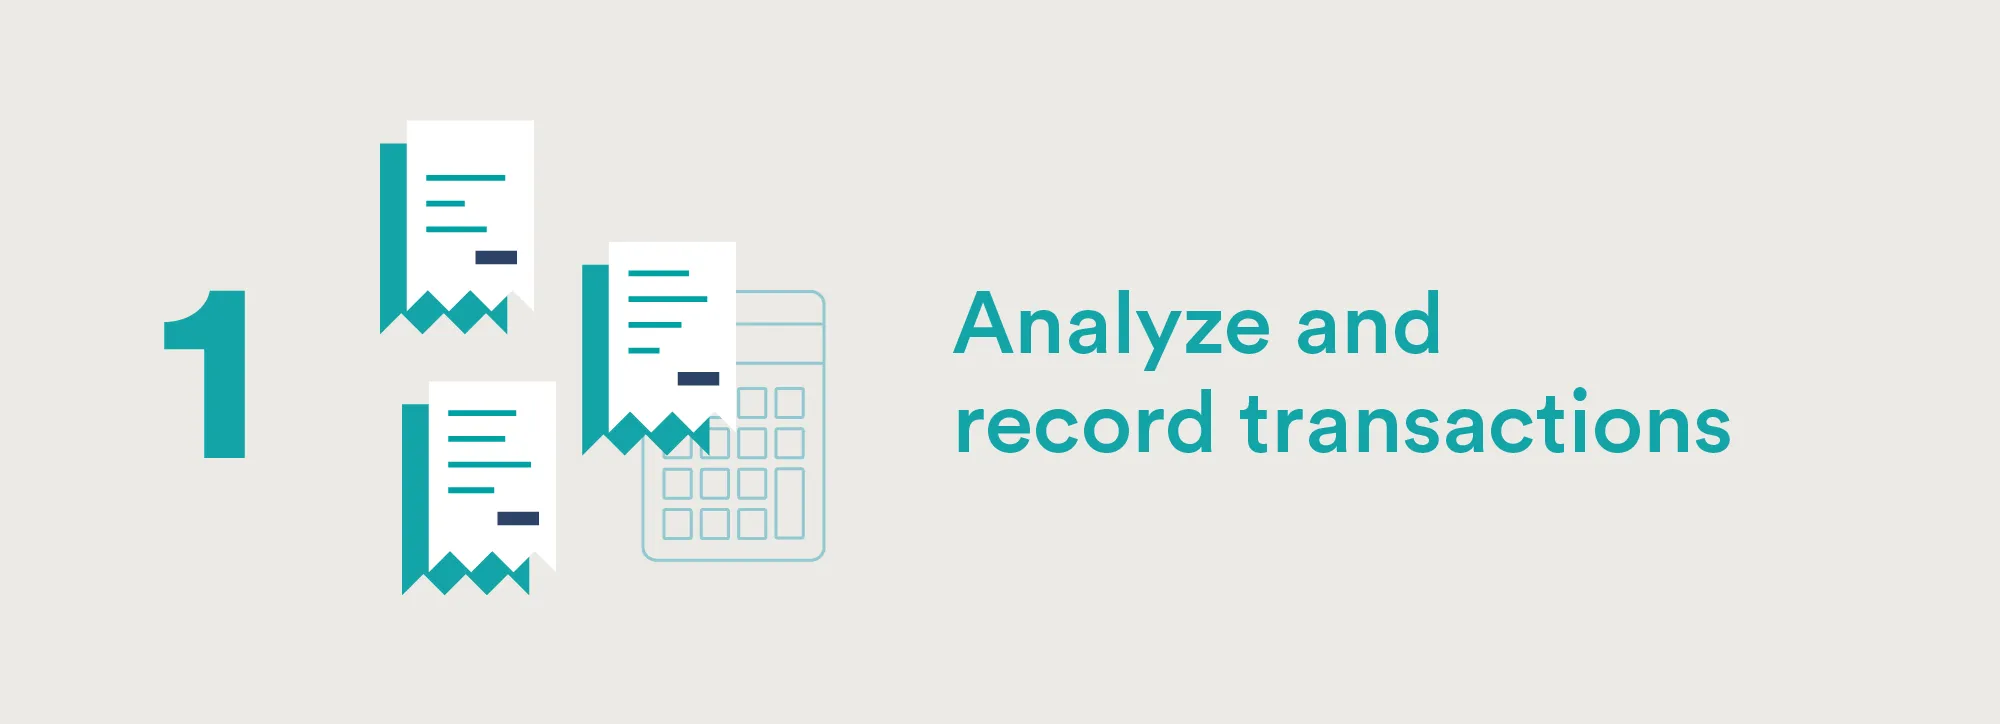 Accounting Cycle Step One: Analyze and Record Transactions